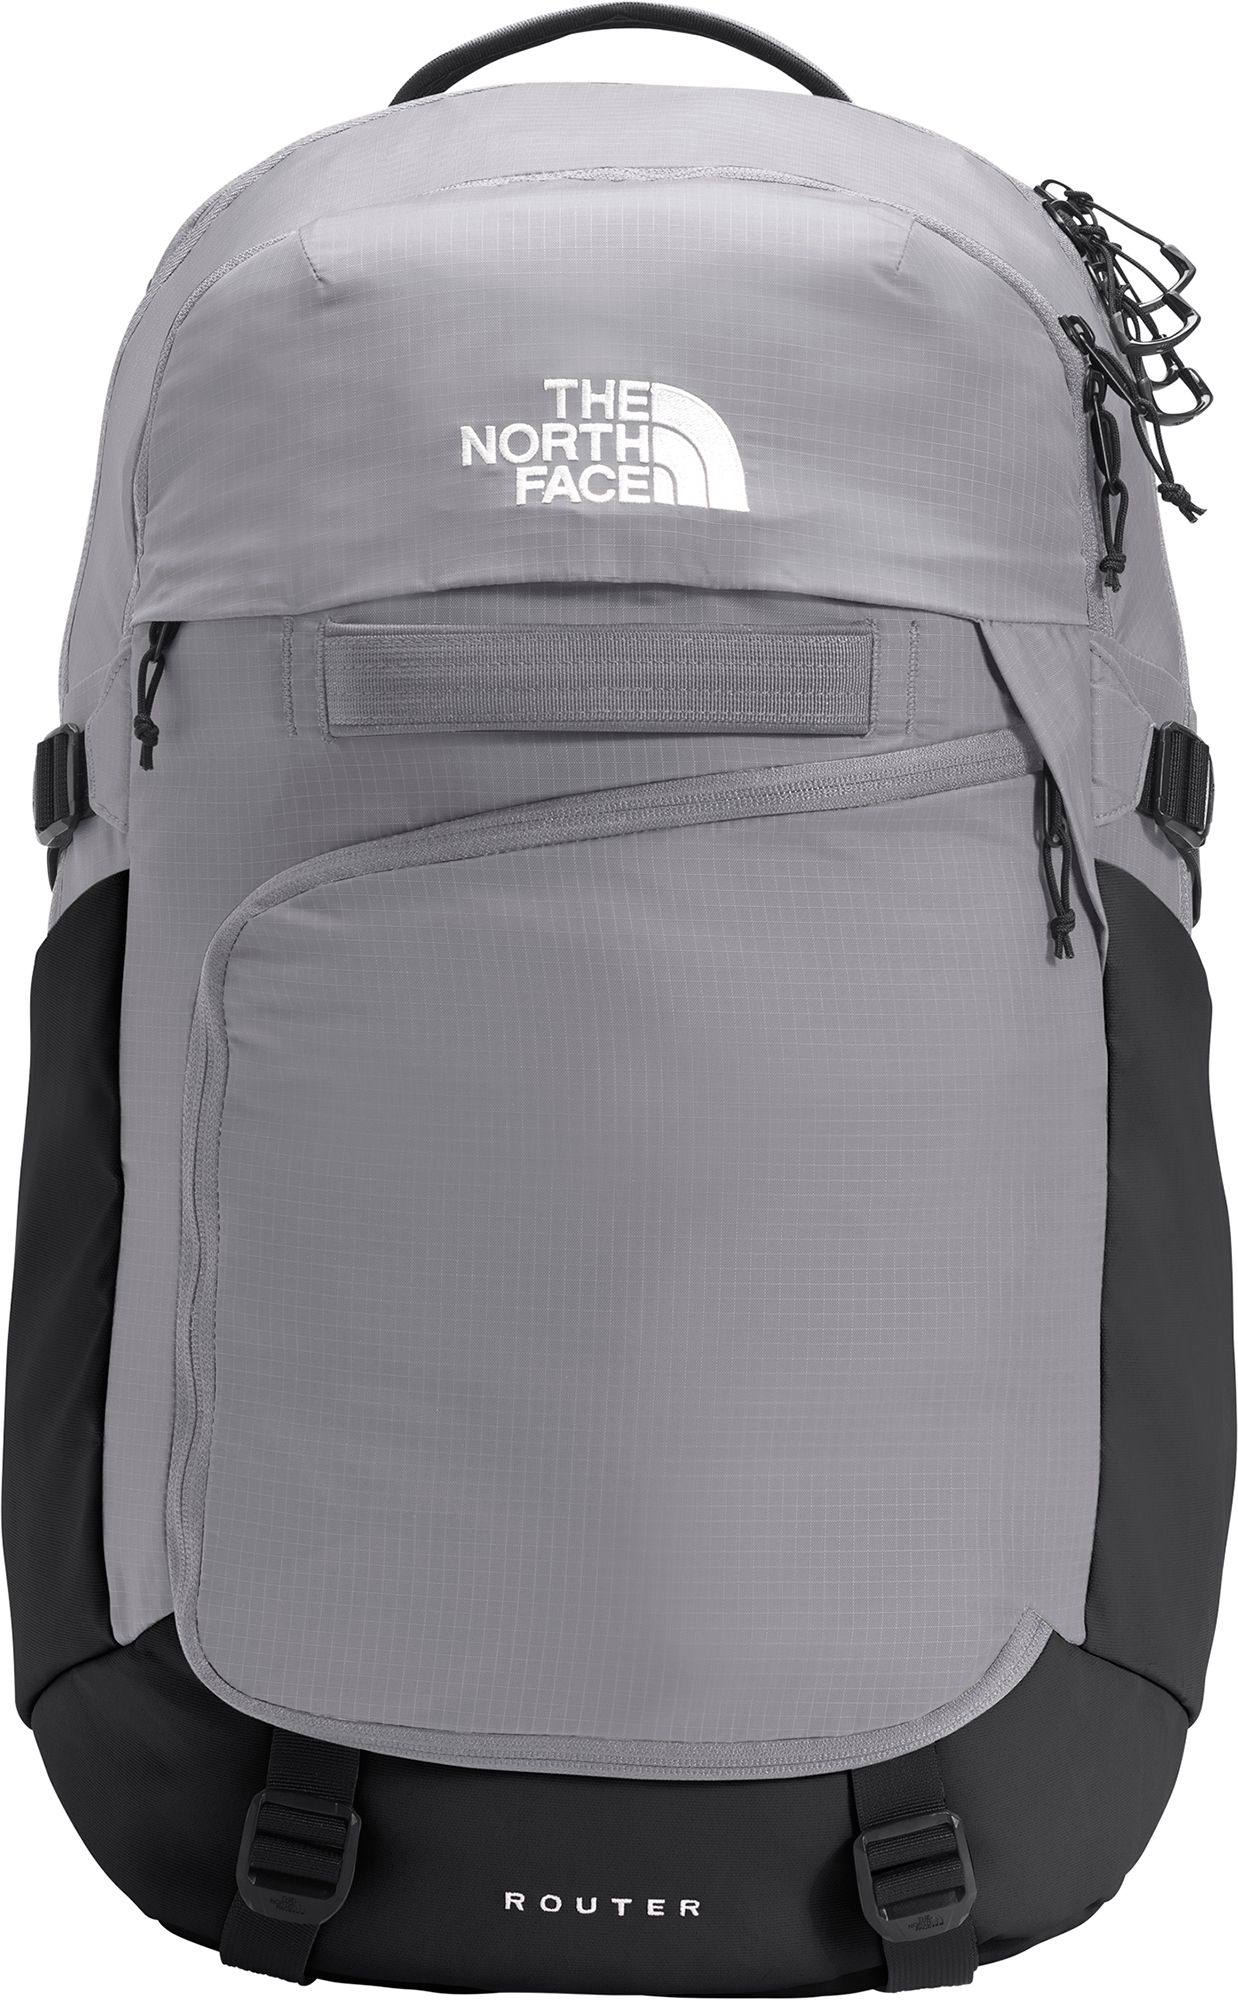 Photos - Backpack The North Face Router , Men's, Meld Grey/Tnf Black 21TNOUMRTRXXXXX 